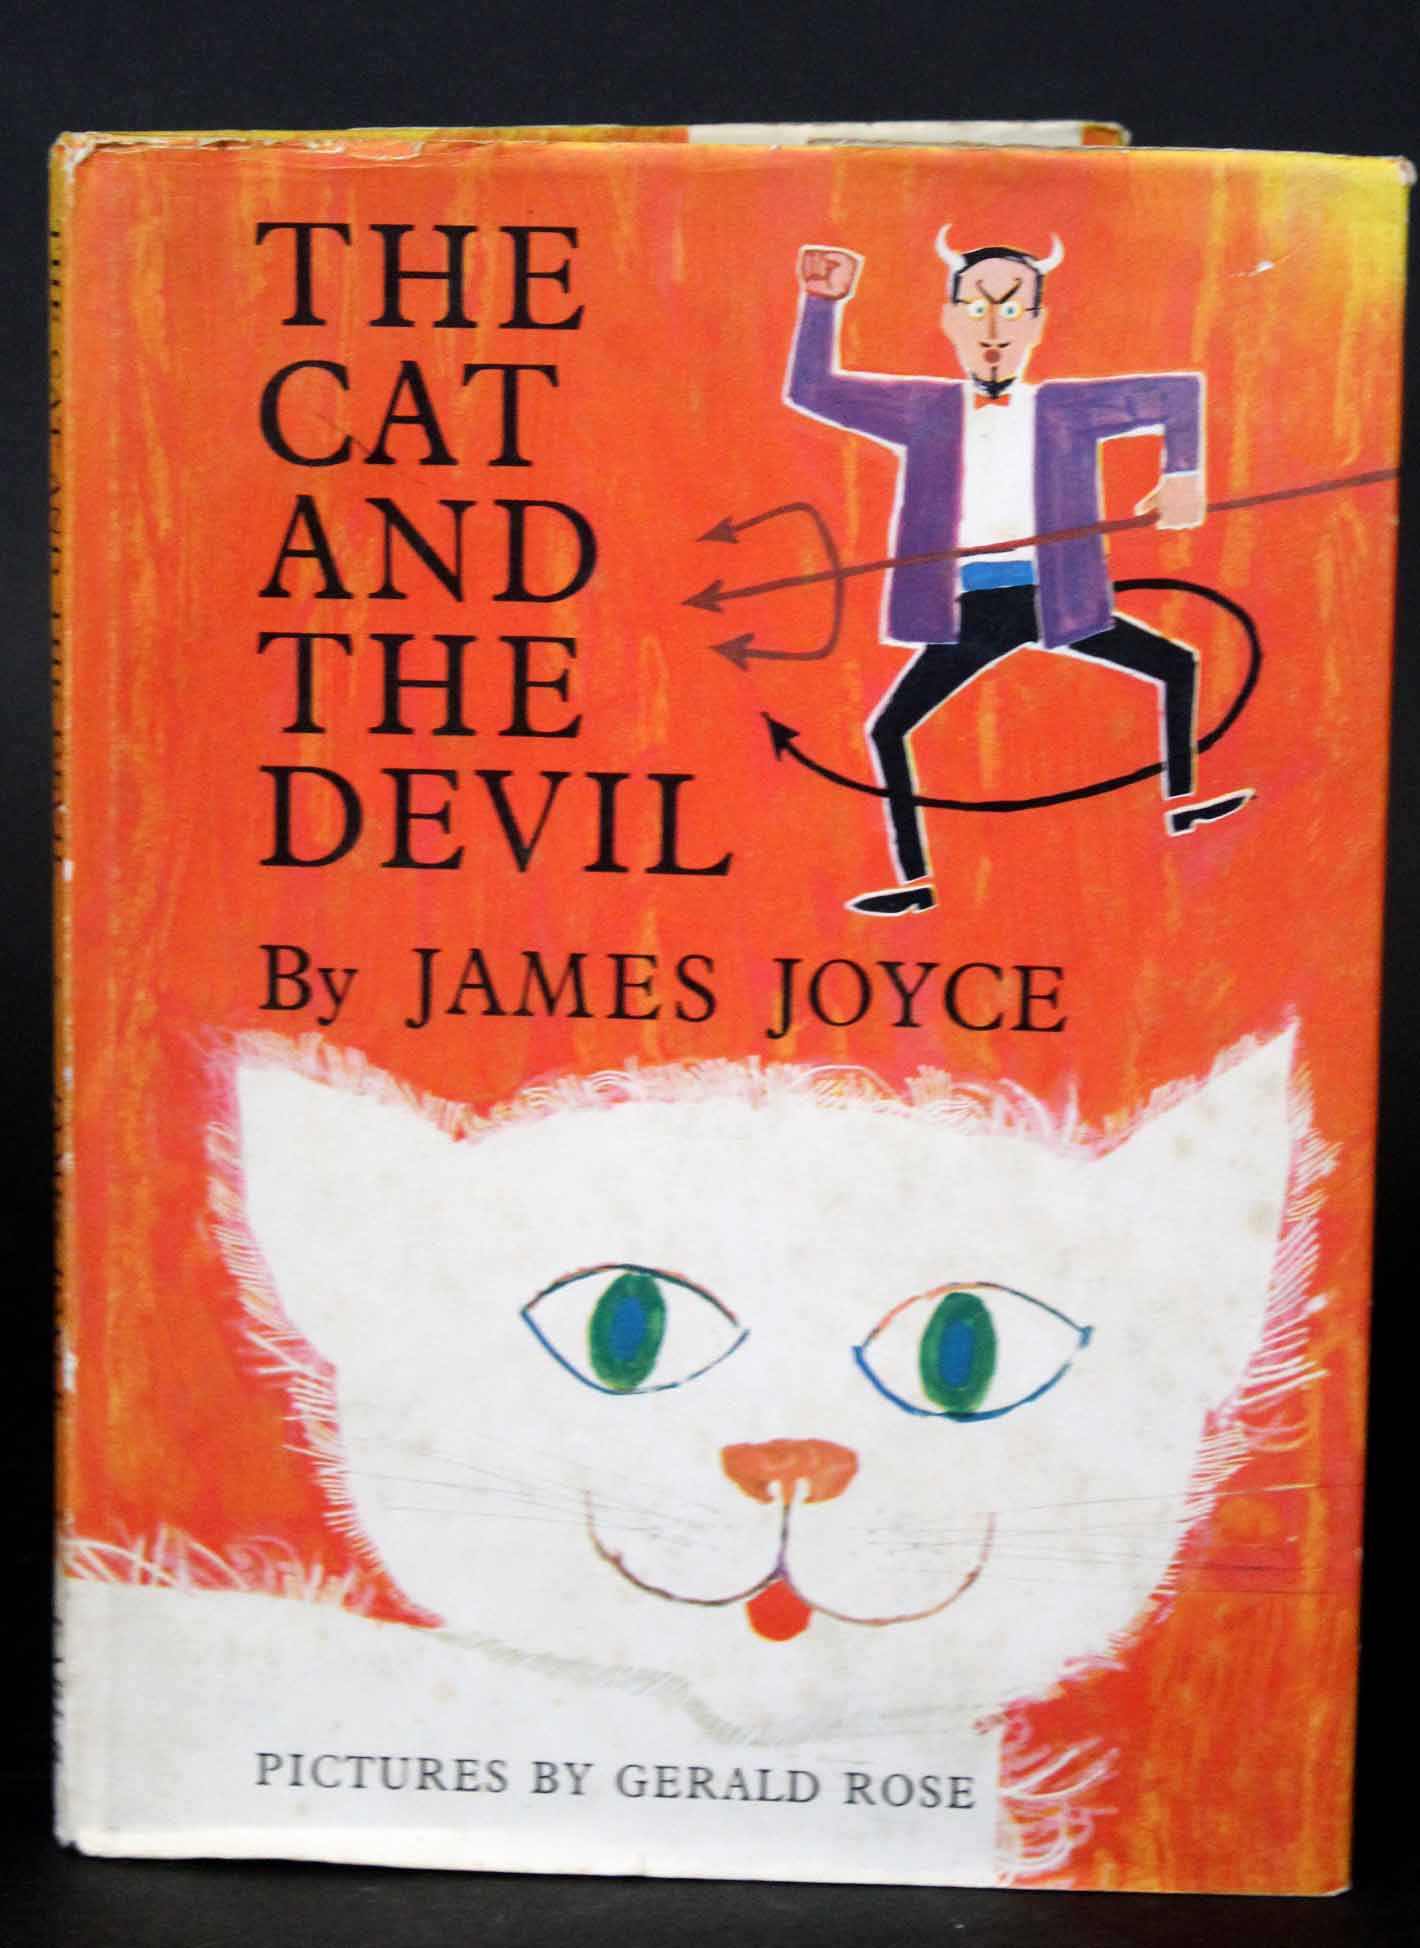 JAMES JOYCE: THE CAT AND THE DEVIL, illustrated Gerald Rose, London, Faber & Faber, 1965, 1st